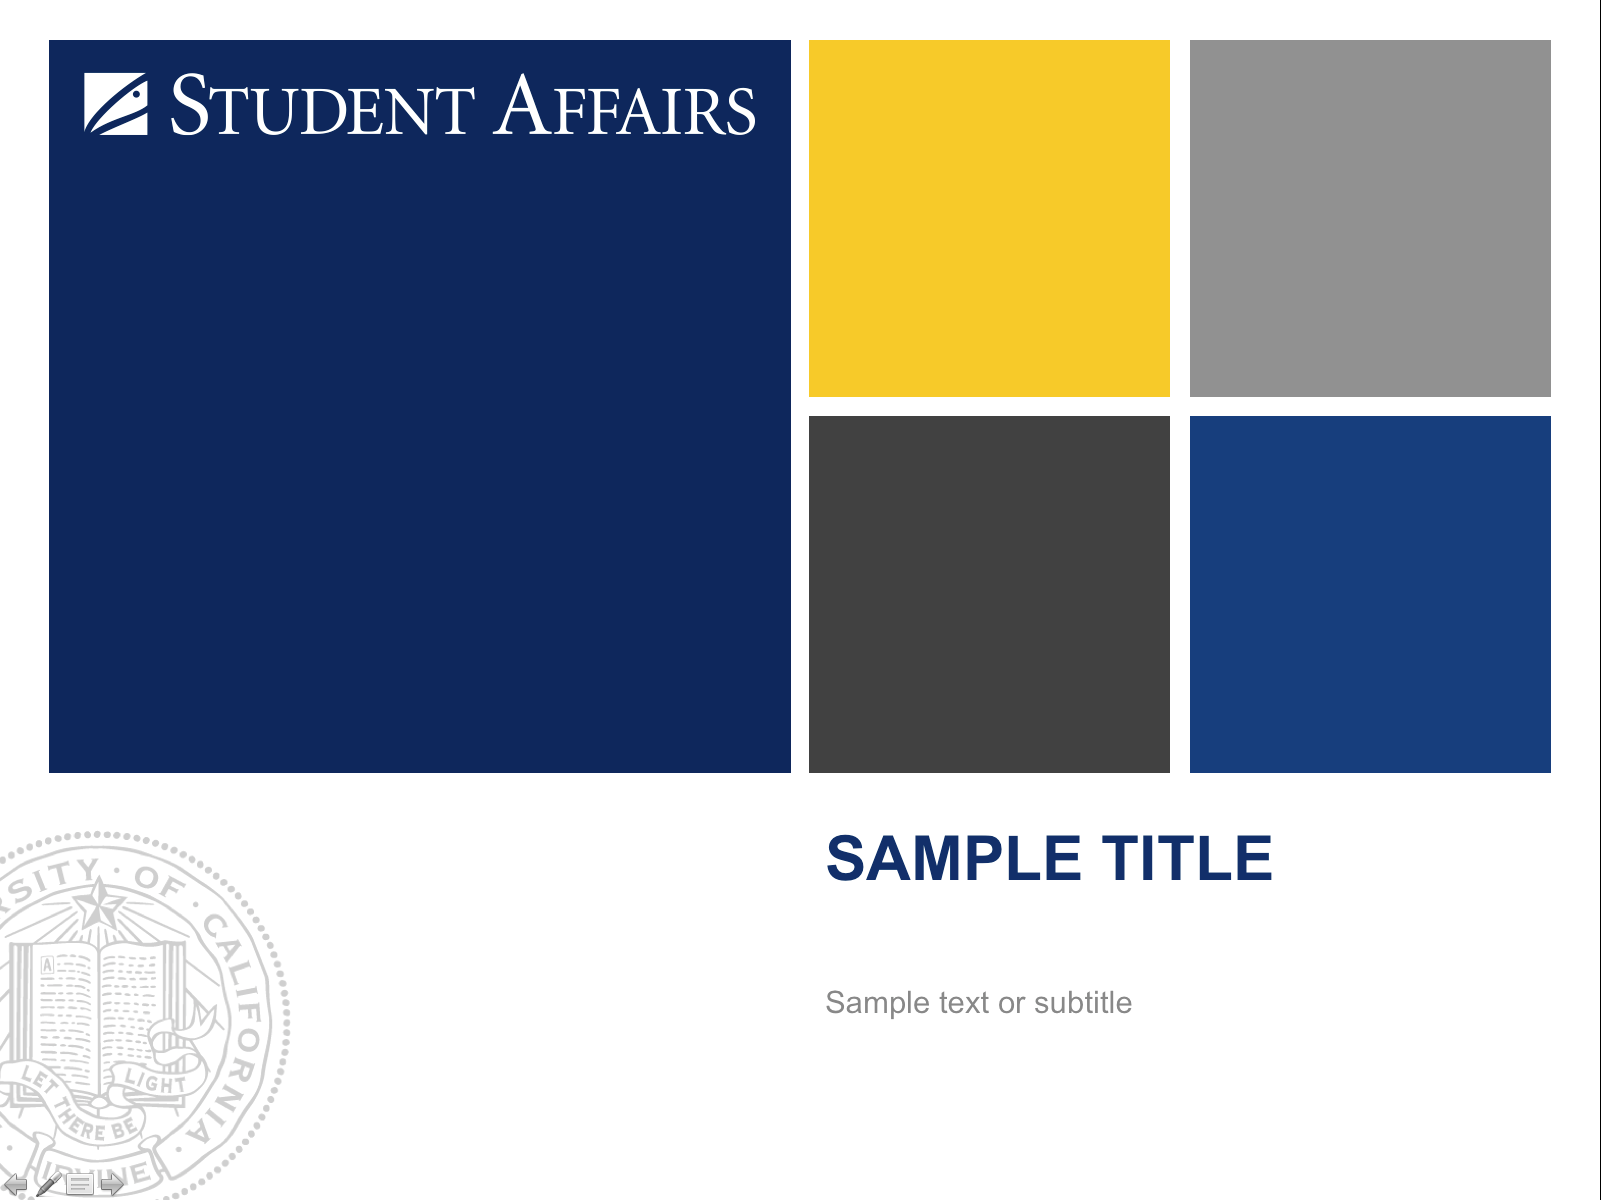 Student Affairs Powerpoint Template: Grid